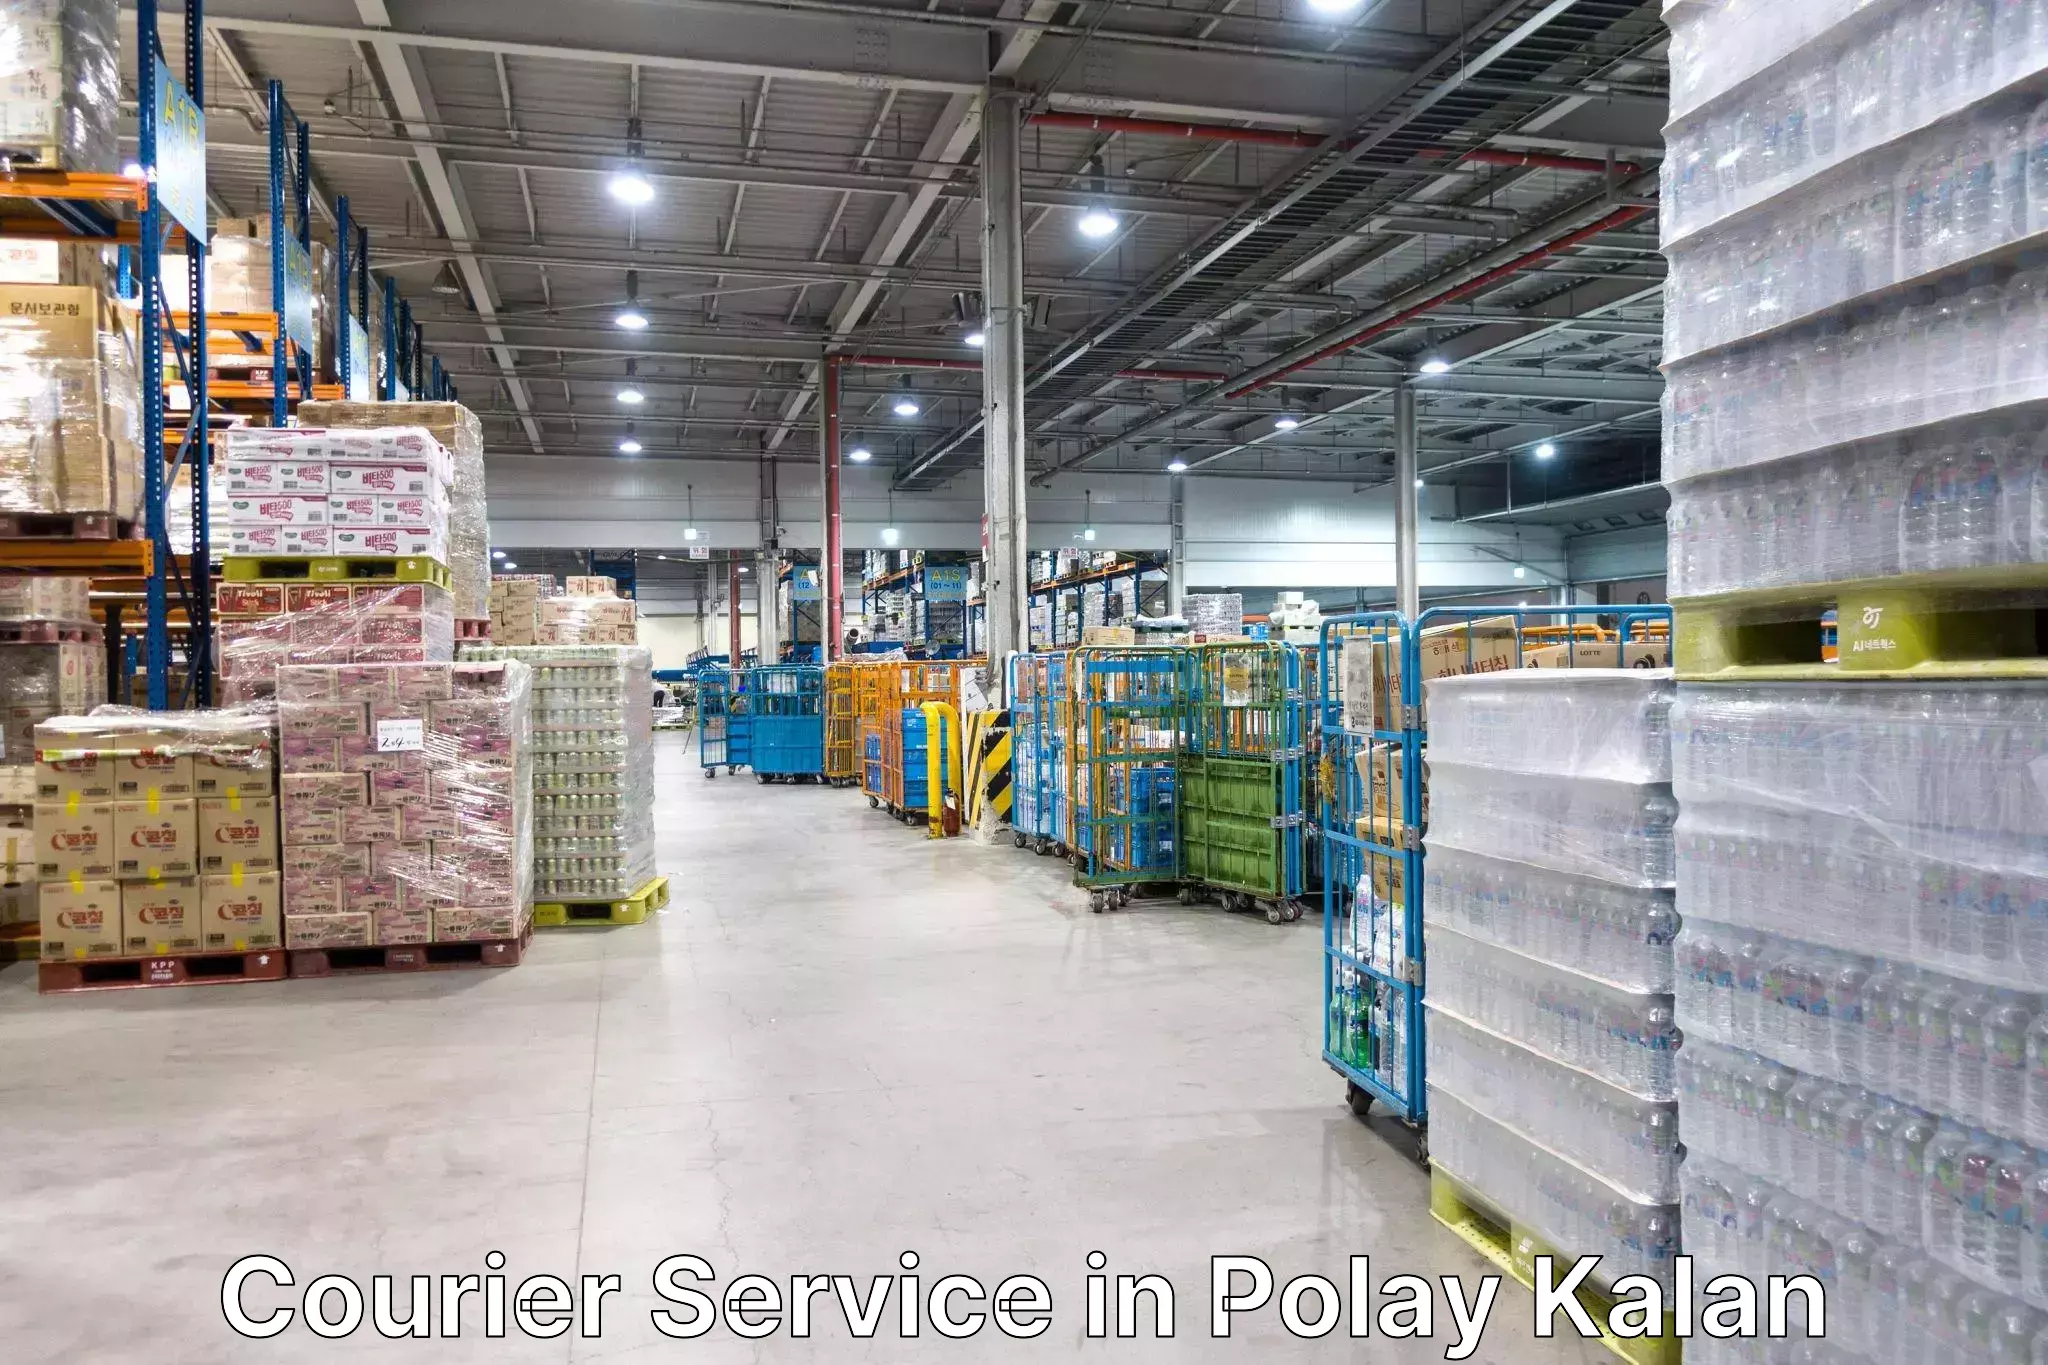 End-to-end delivery in Polay Kalan